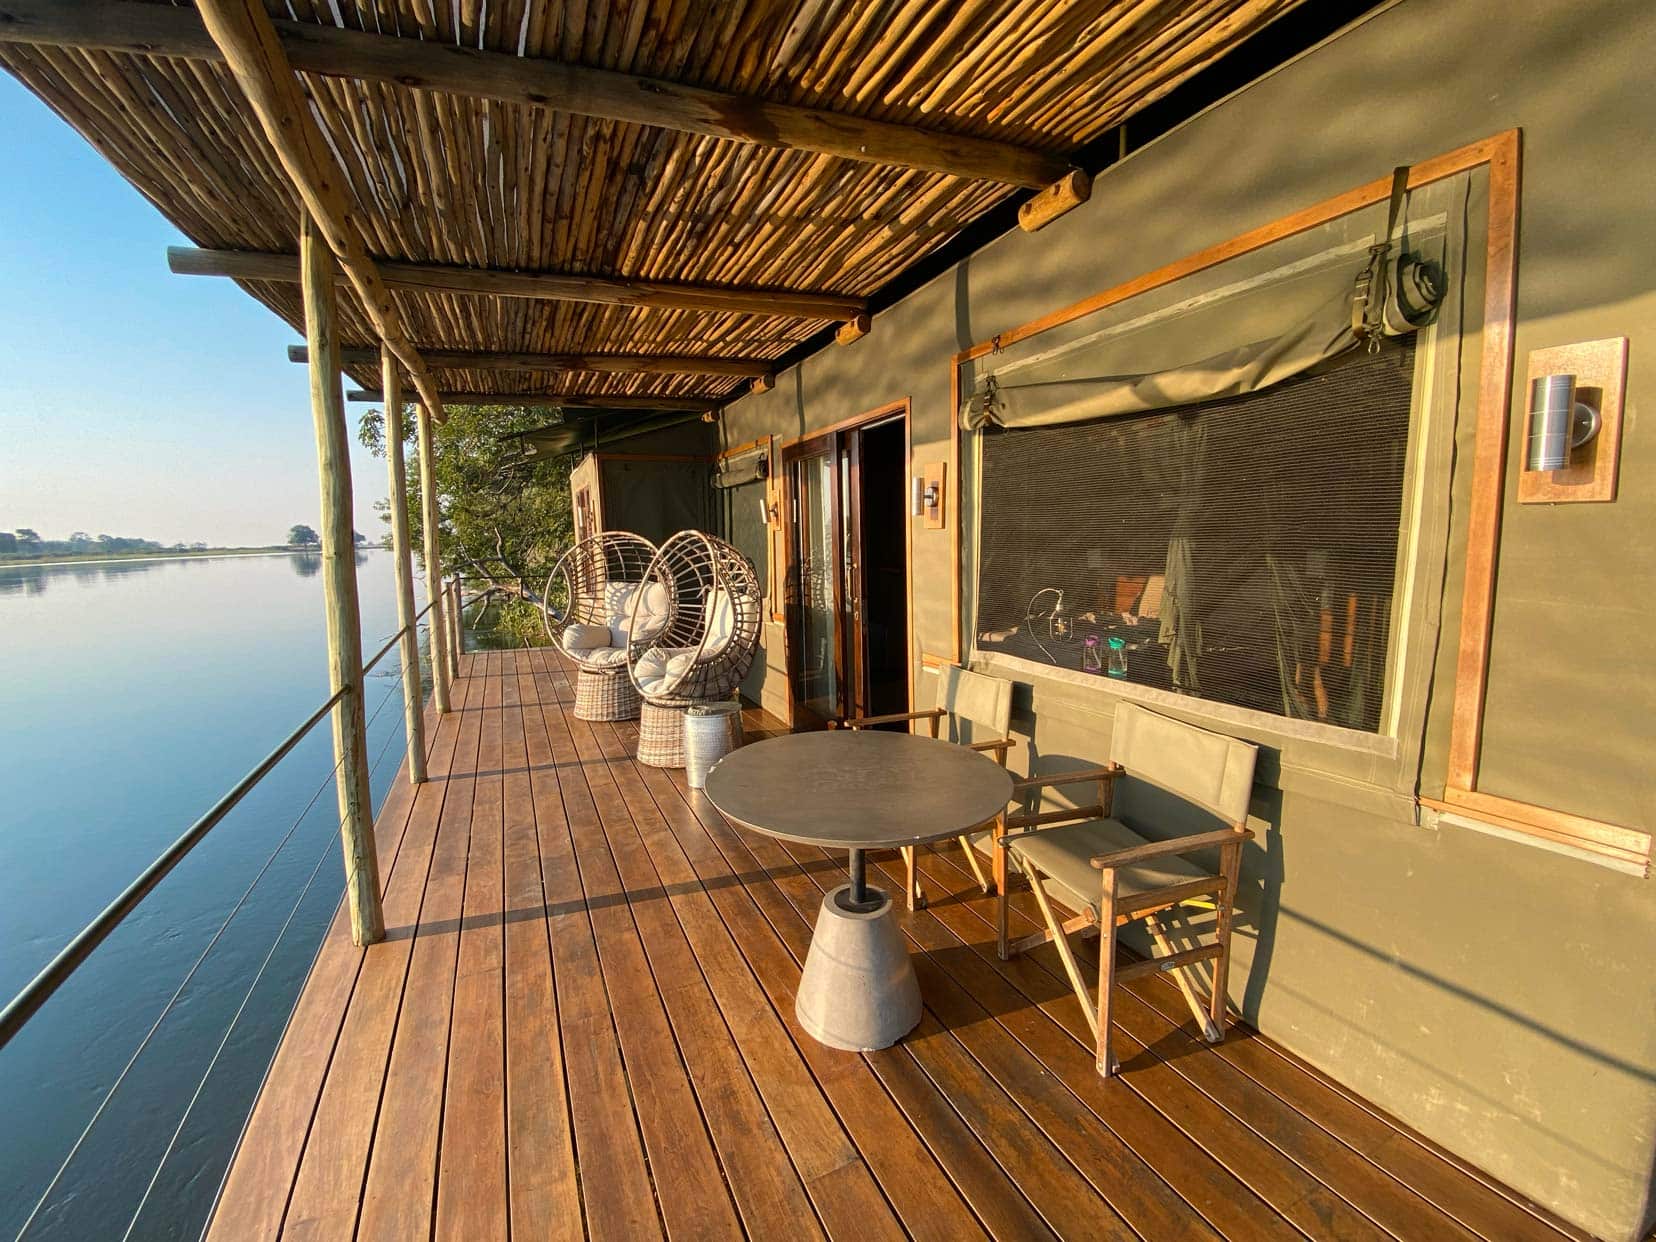 The River Suite on the actual river with wooden deck